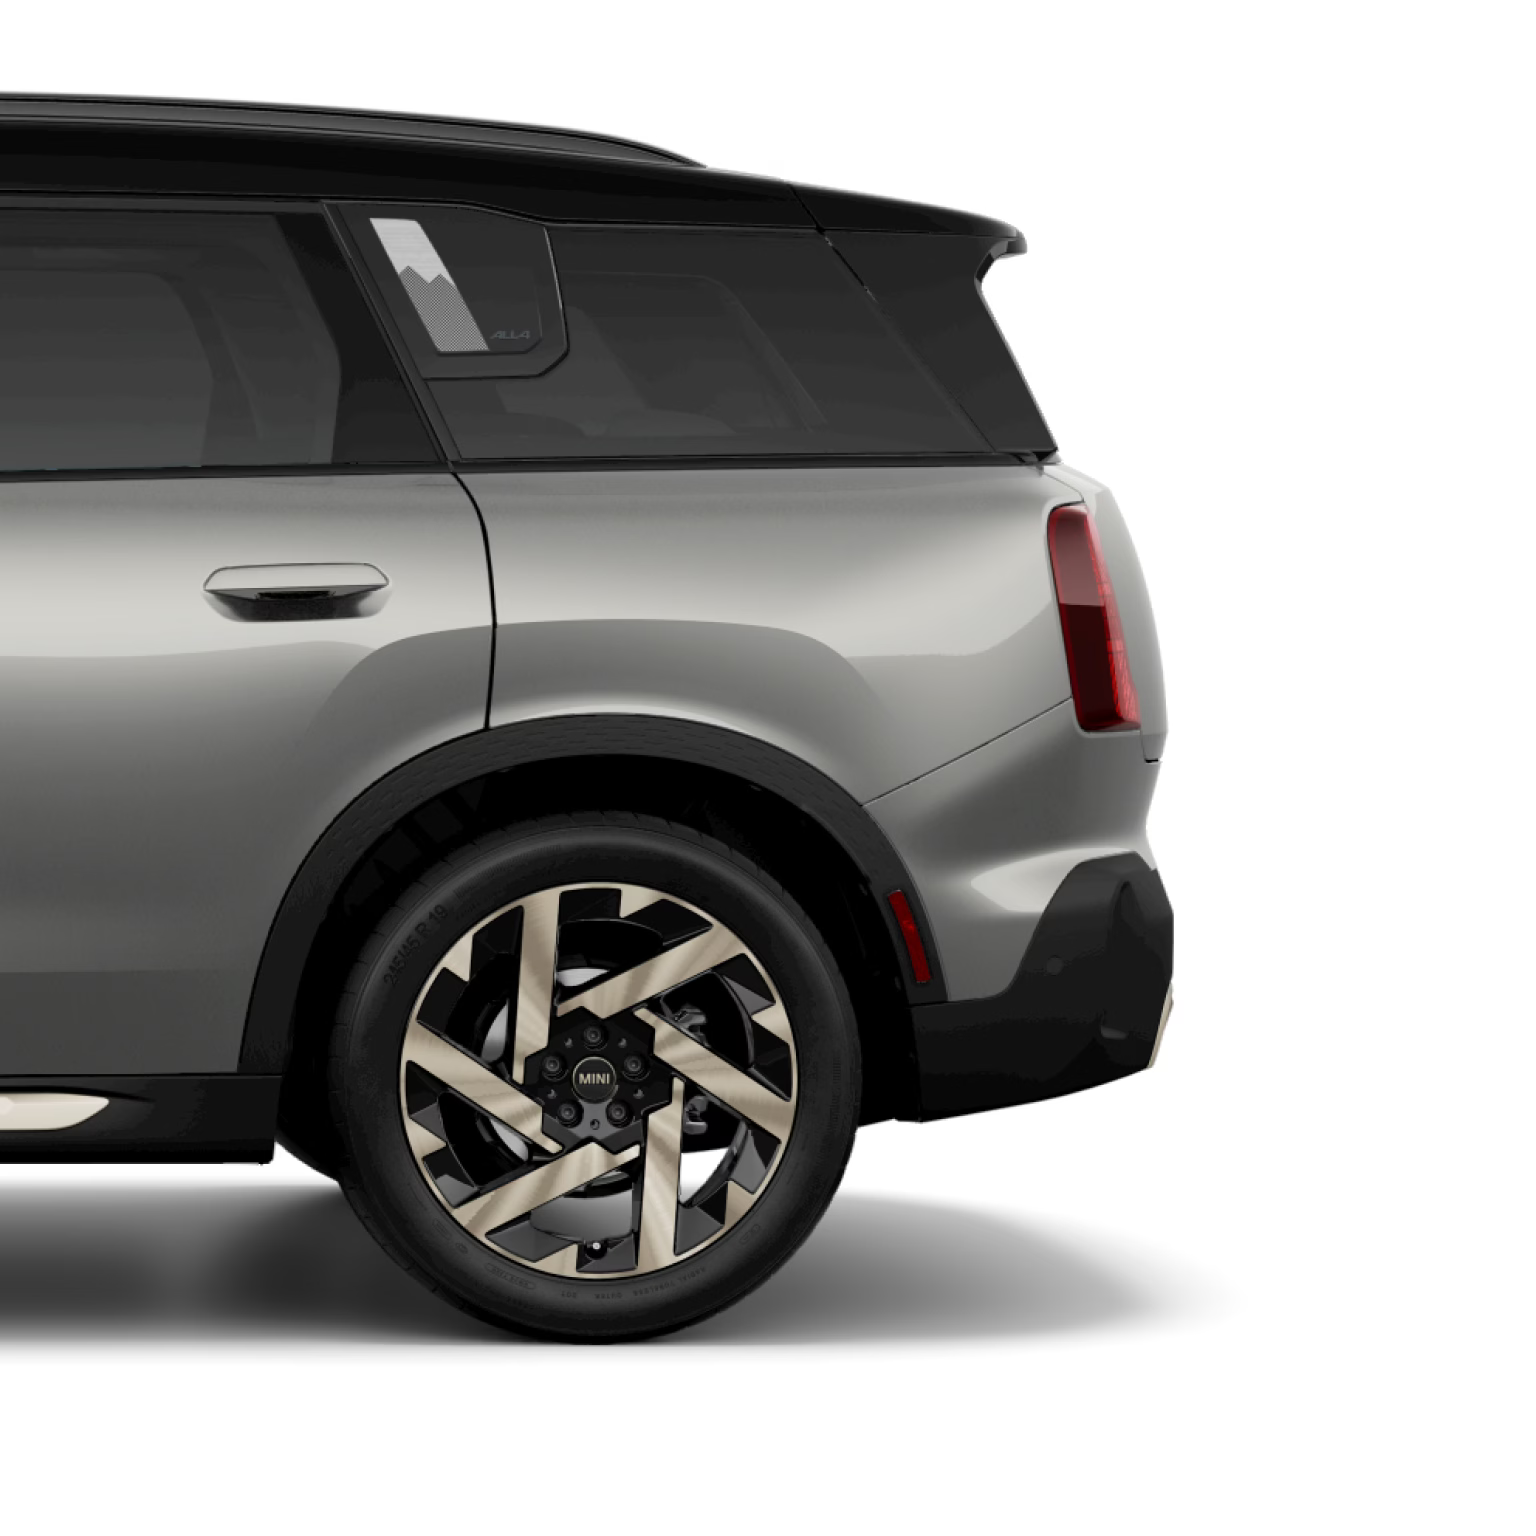 Side view of rear half of a MINI Countryman S All4.